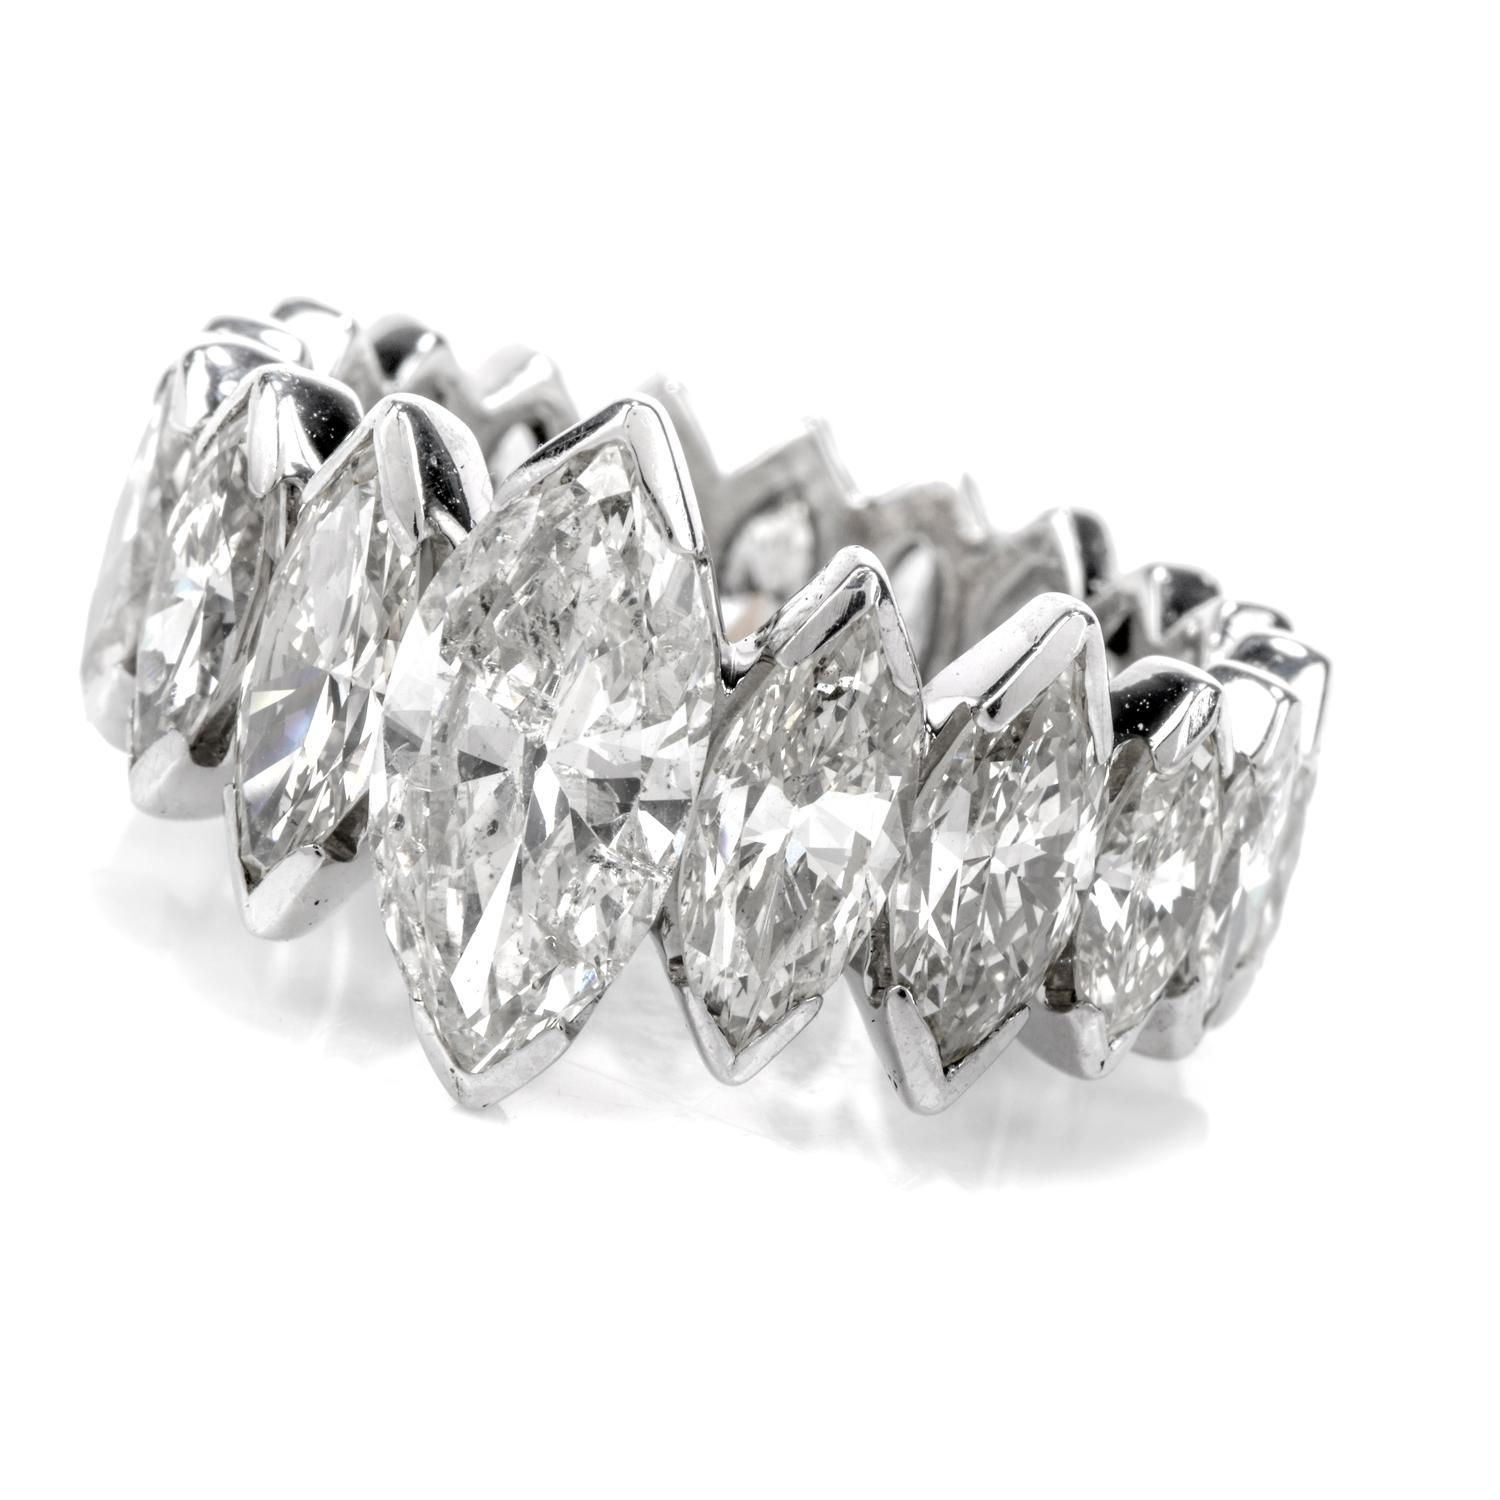 Your love will be eternal forever with this exquisitely uniquen 8.72 carat Diamond Platinum Marquise Shaped Eternity Band!

 This gorgeous eternity band has 19 genuine diamonds with J-L color, VS1-SI2 Clarity set in a prong setting.
The shinning